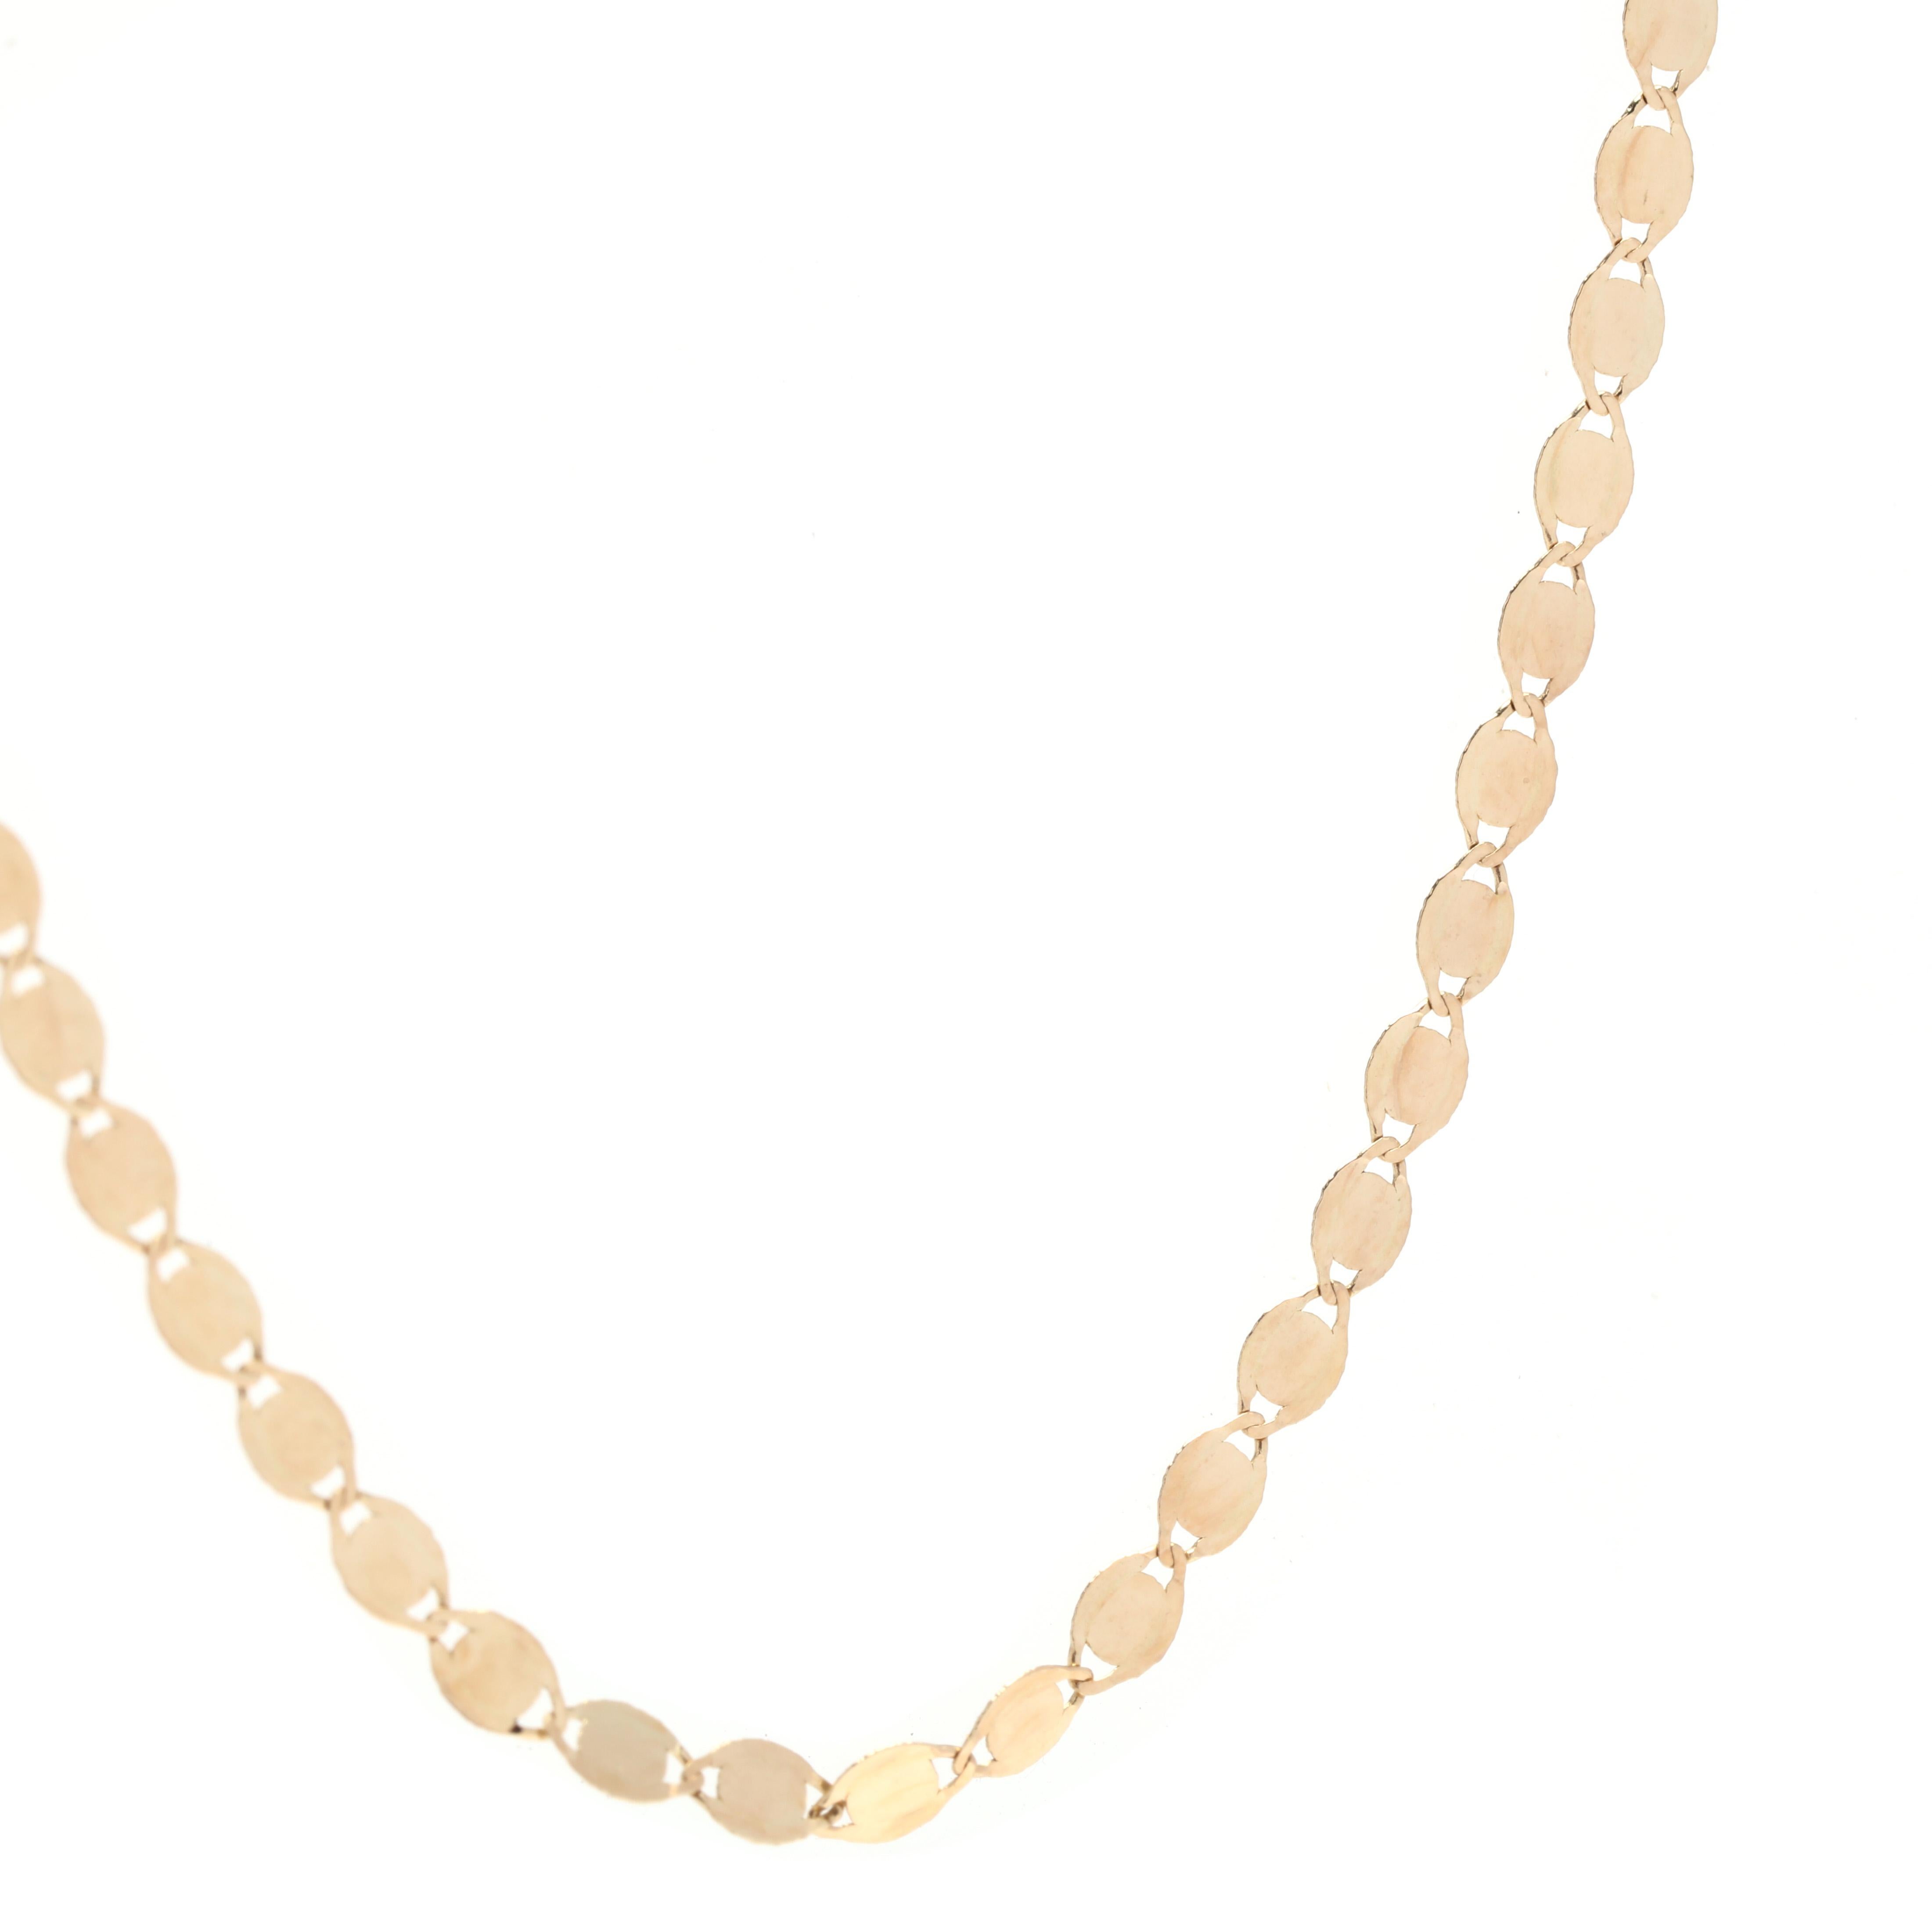 A new 14 karat yellow gold 2.2 mm oval mirror chain necklace. This simple chain features flat oval links to give a mirror effect and with a lobster clasp.

Length: 24 in.

Width: 2.2 mm

Weight: 1.2 dwts. / 1.87 grams

Stamps: 14K RCI


Ring Sizings